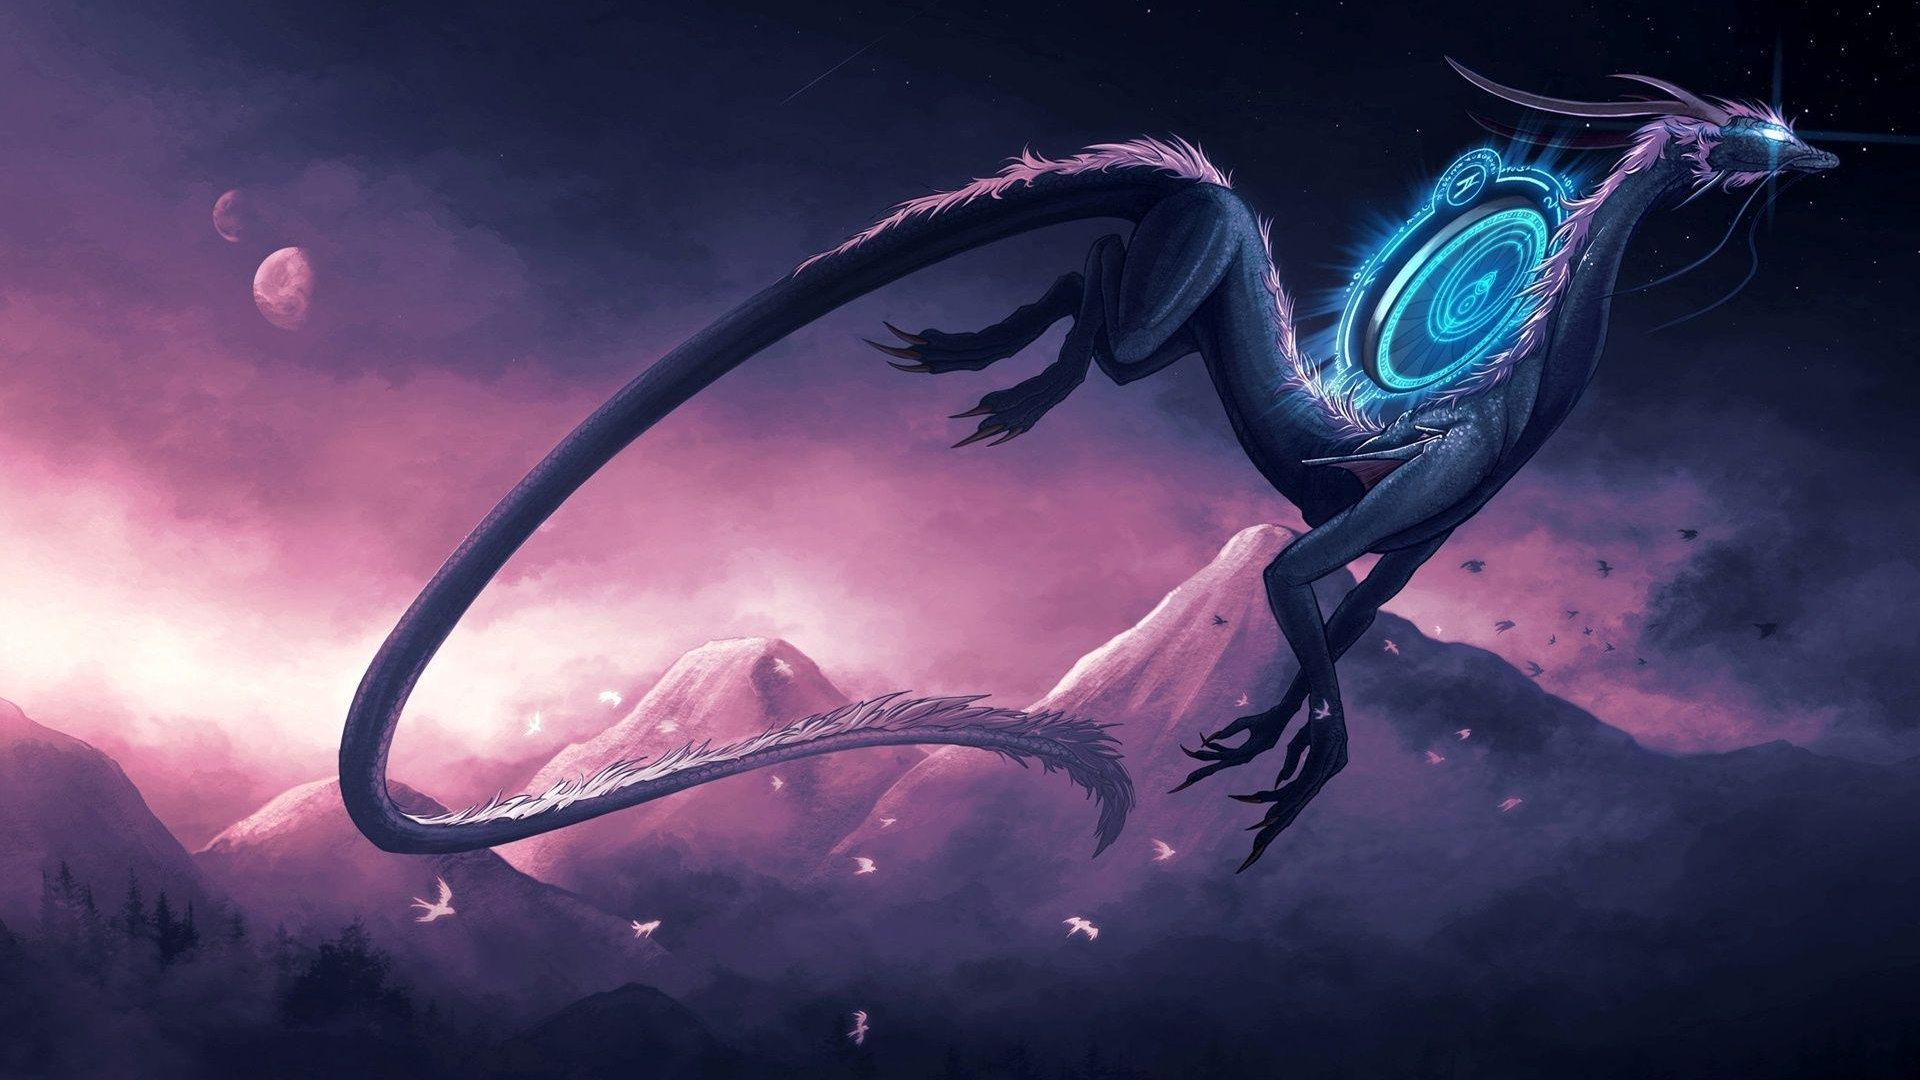 1920x1080 Free download Mythical Creatures Wallpapers [1920x1174] for your Desktop, Mobile \u0026 Tablet | Explore 73+ Mythical Creatures Wallpaper | Mythical Wallpapers, Free Mystical Wallpaper Downloads, Creature Wallpaper